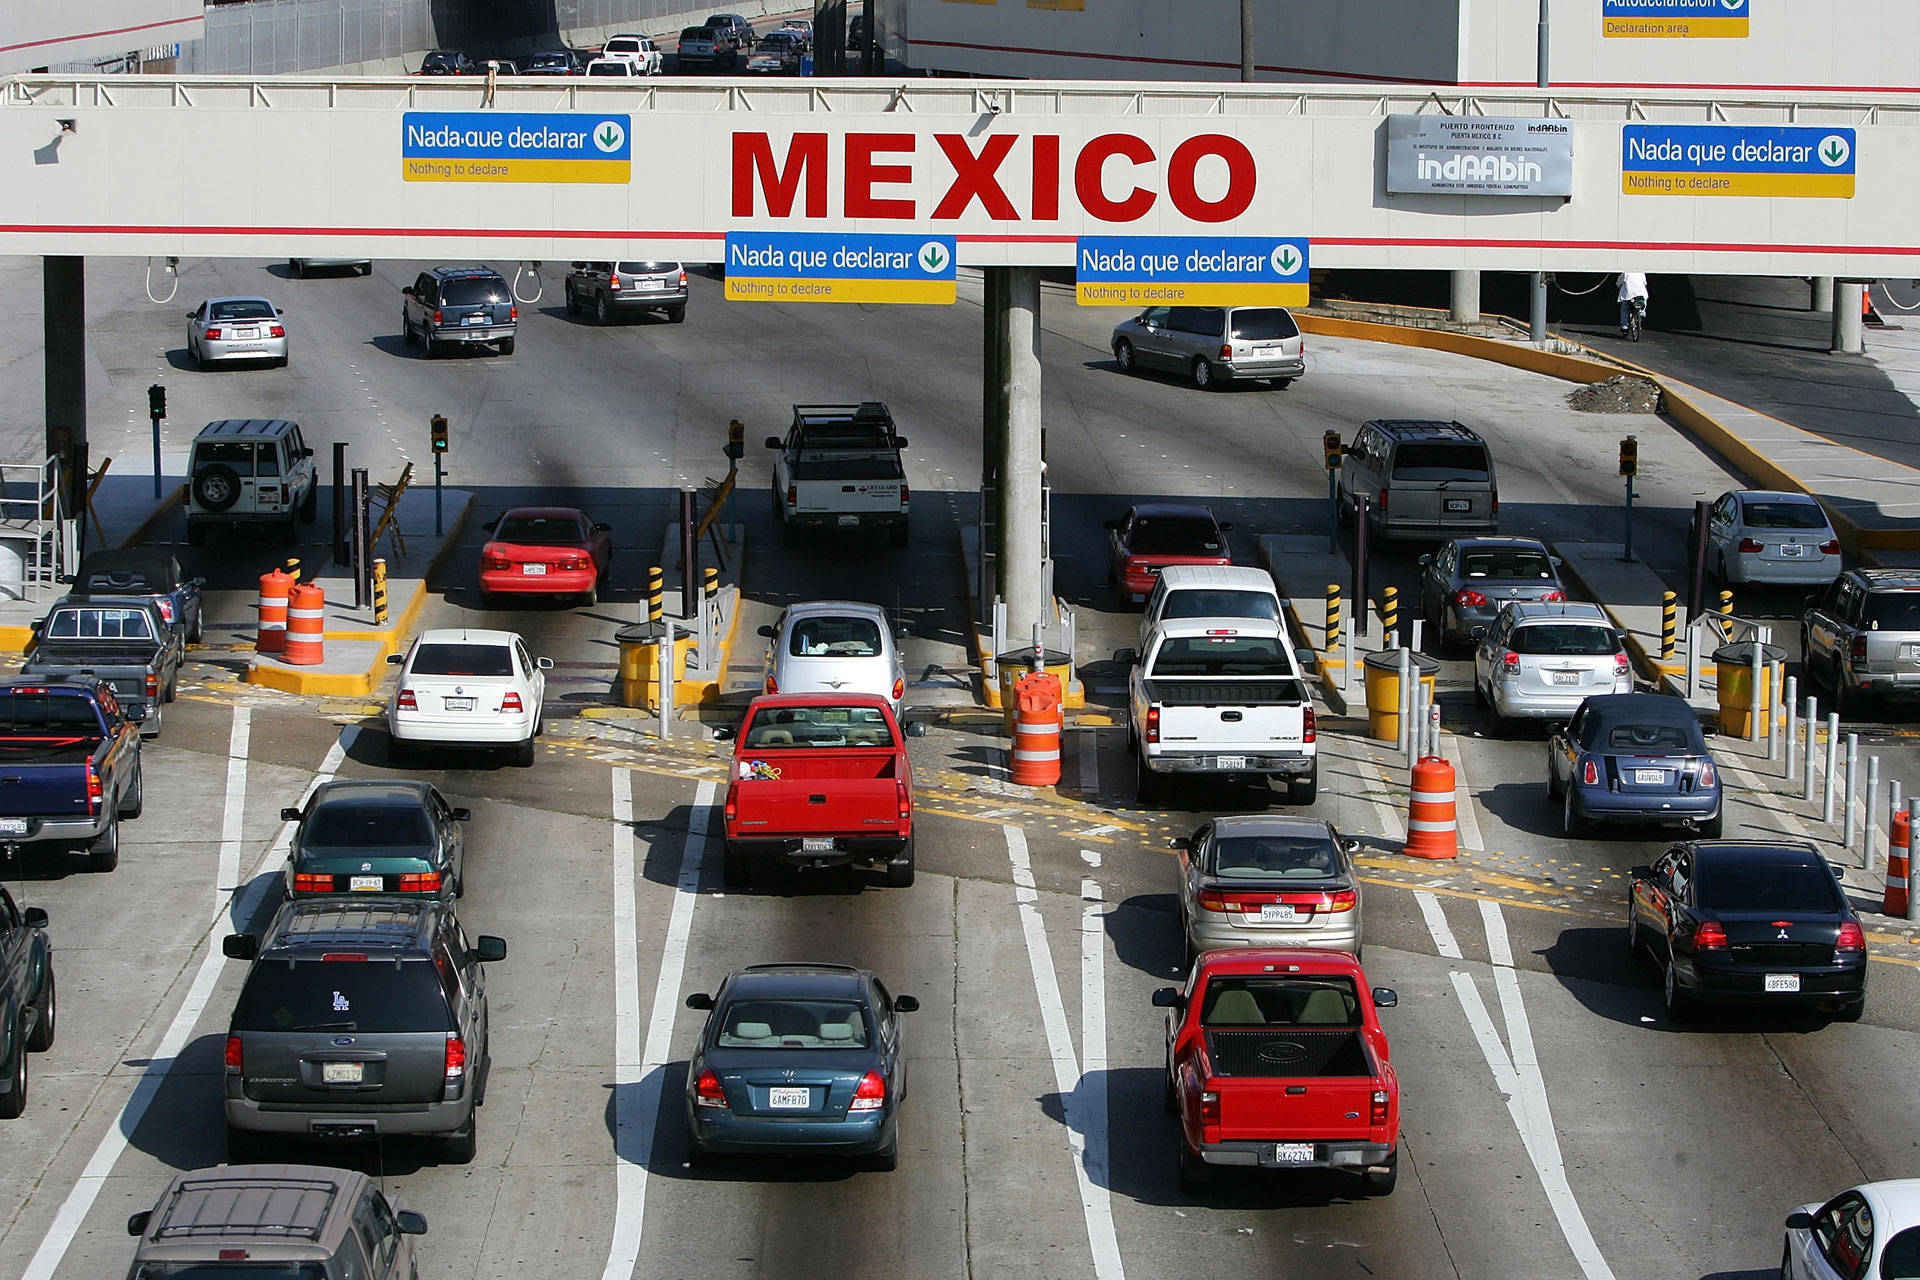 Traffic enters Mexico from the U.S. at the San Ysidro border crossing. David McNew/Getty Images